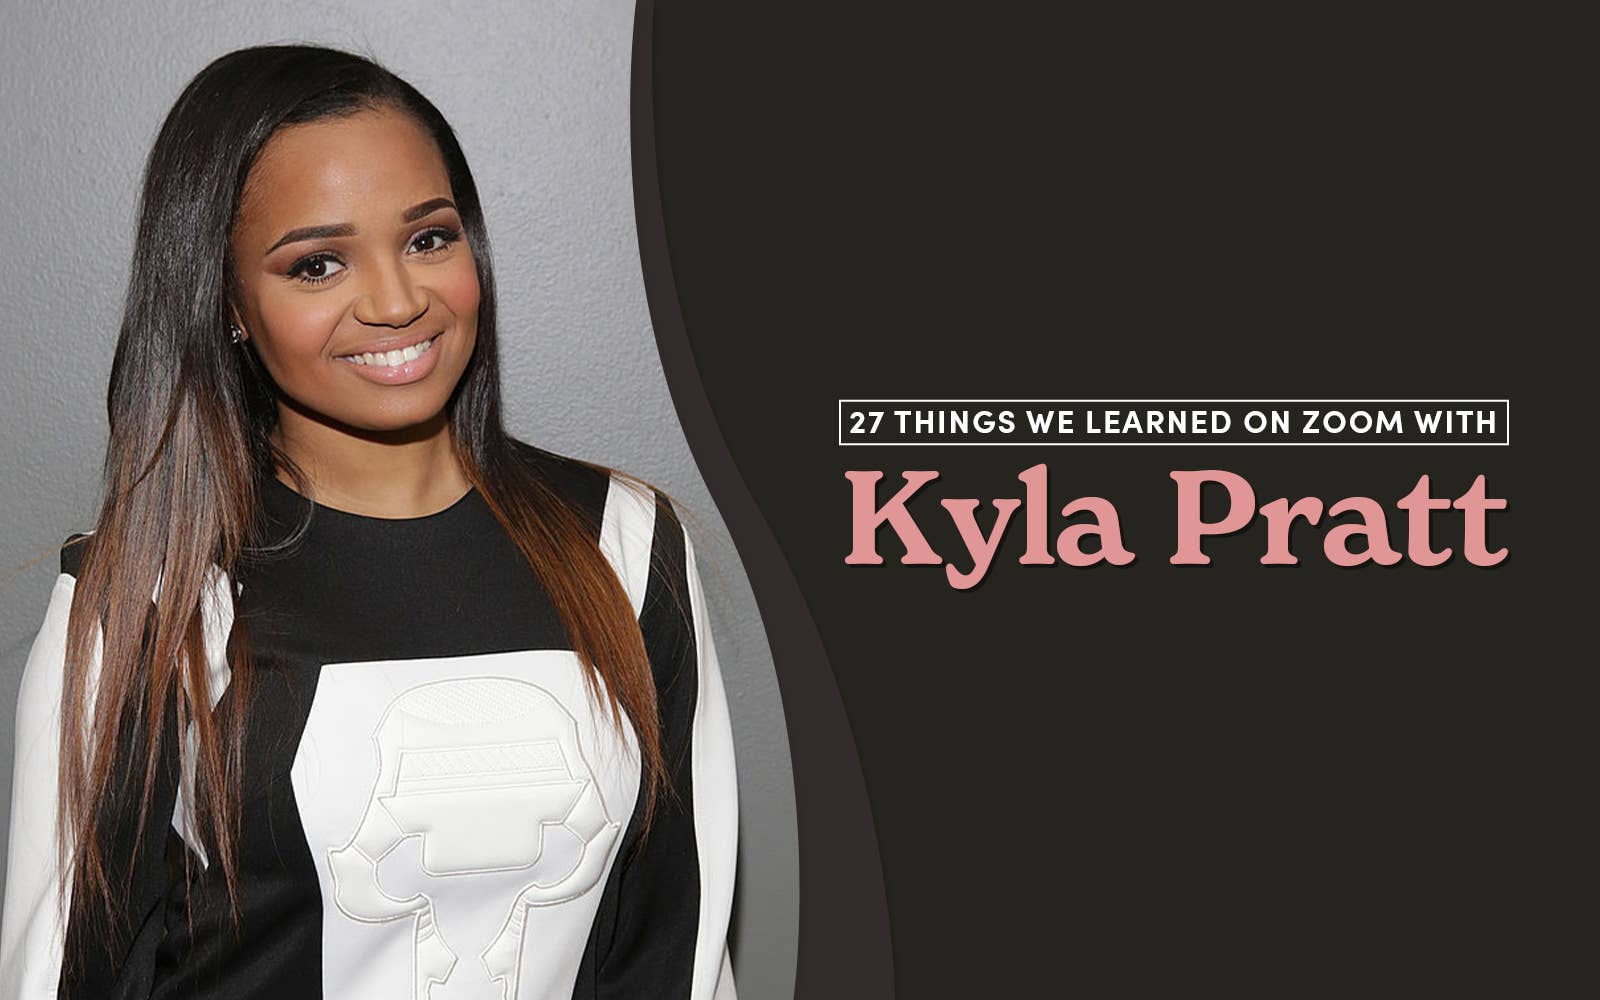 Kyla Pratt smiling, wearing a dark and light outfit with bright lipstick